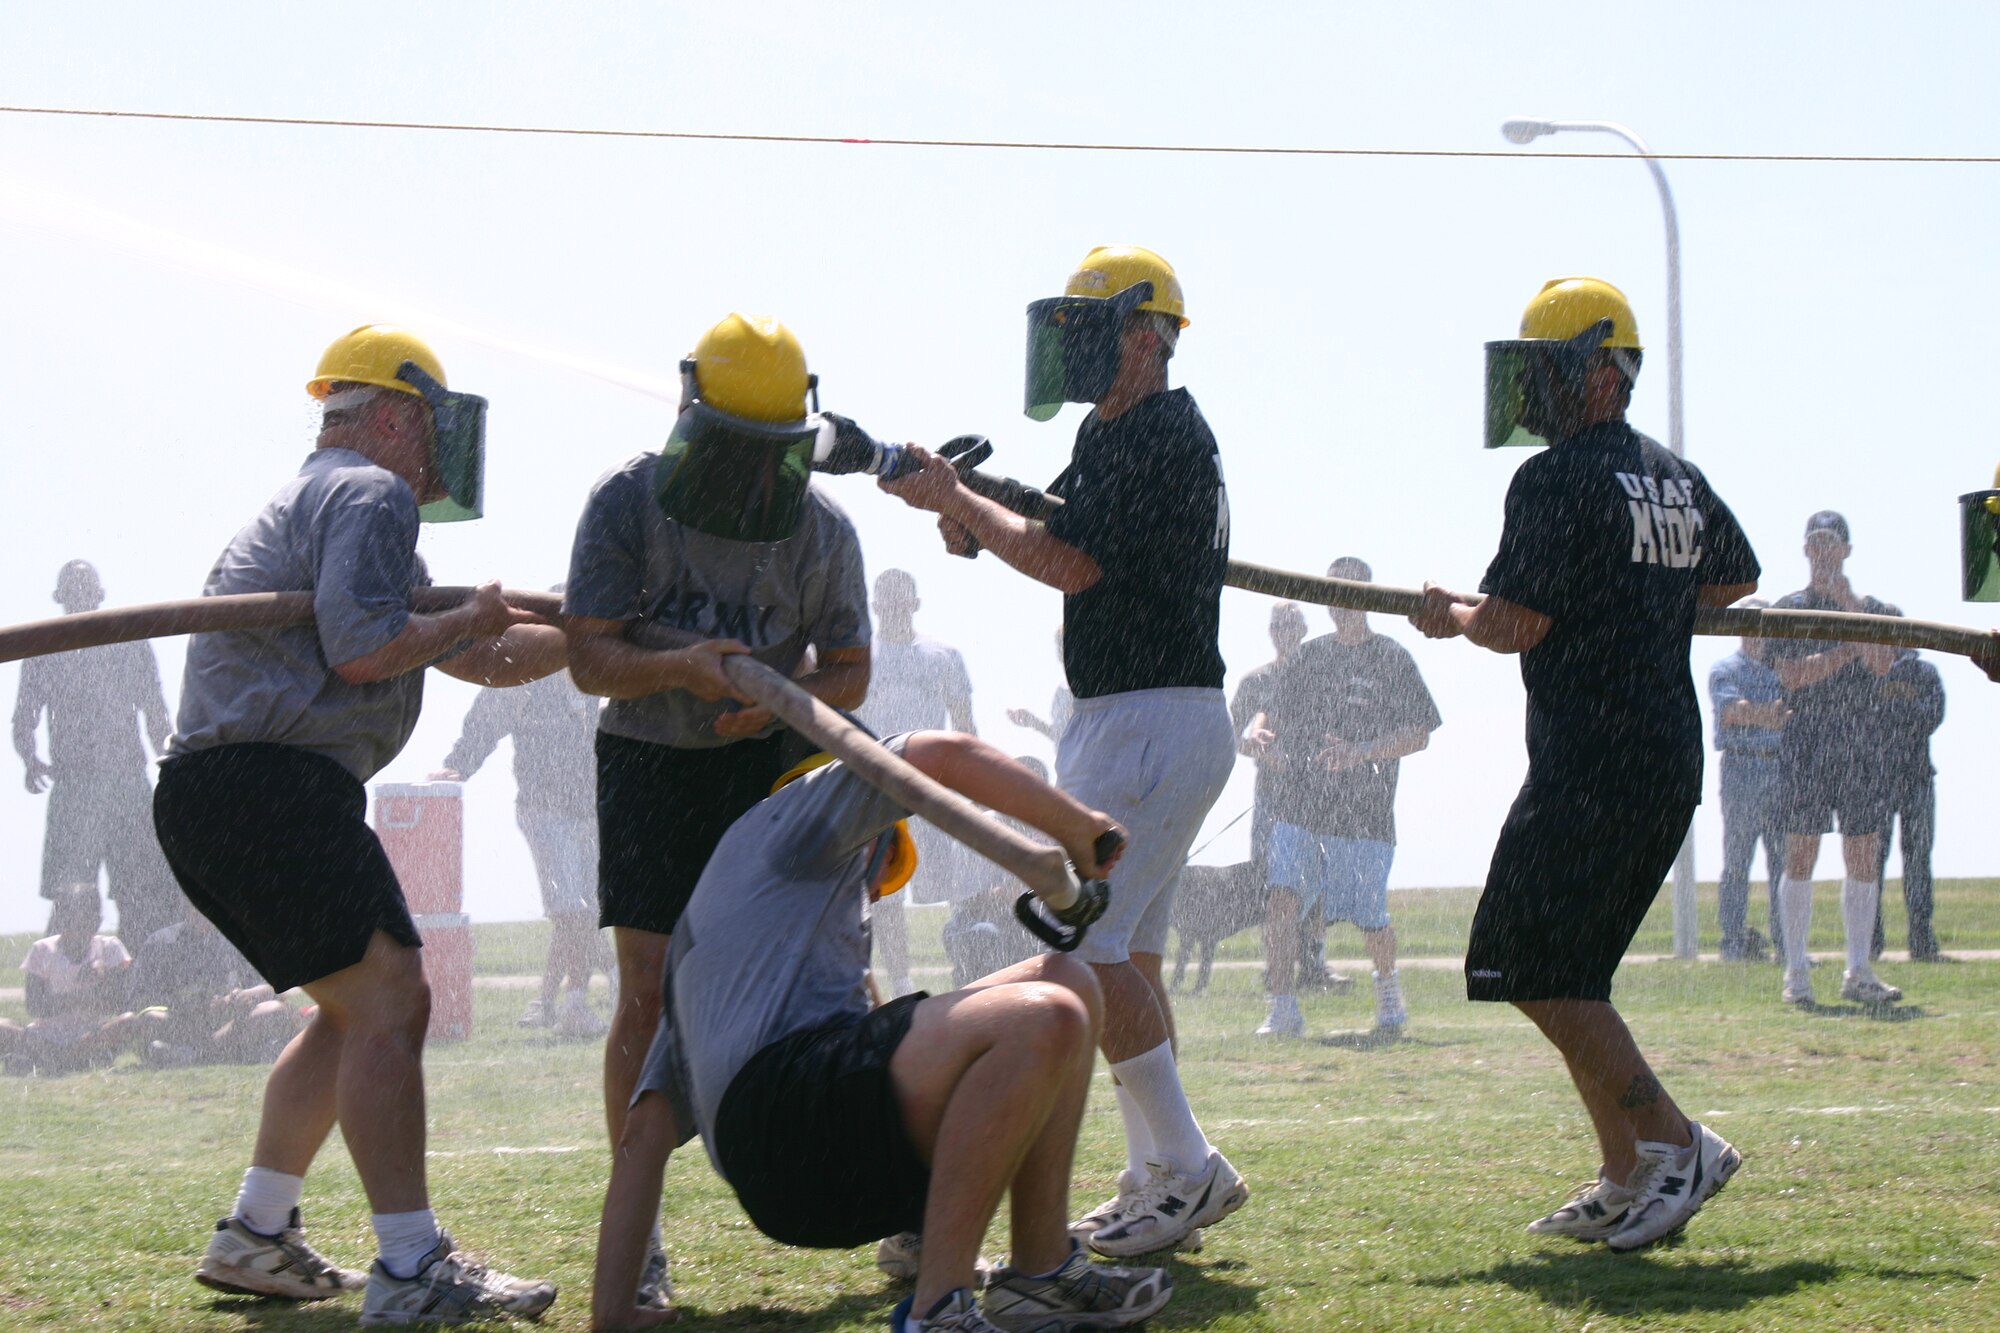 Members from the 383rd Training Squadron team face off against the Army service team in the fireman’s tug-of-war event. Both teams struggled to employ fire hoses to push the marker to the other teams side but the 383rd TRS won. (U.S. Air Force photo/Airman Jacob Corbin).